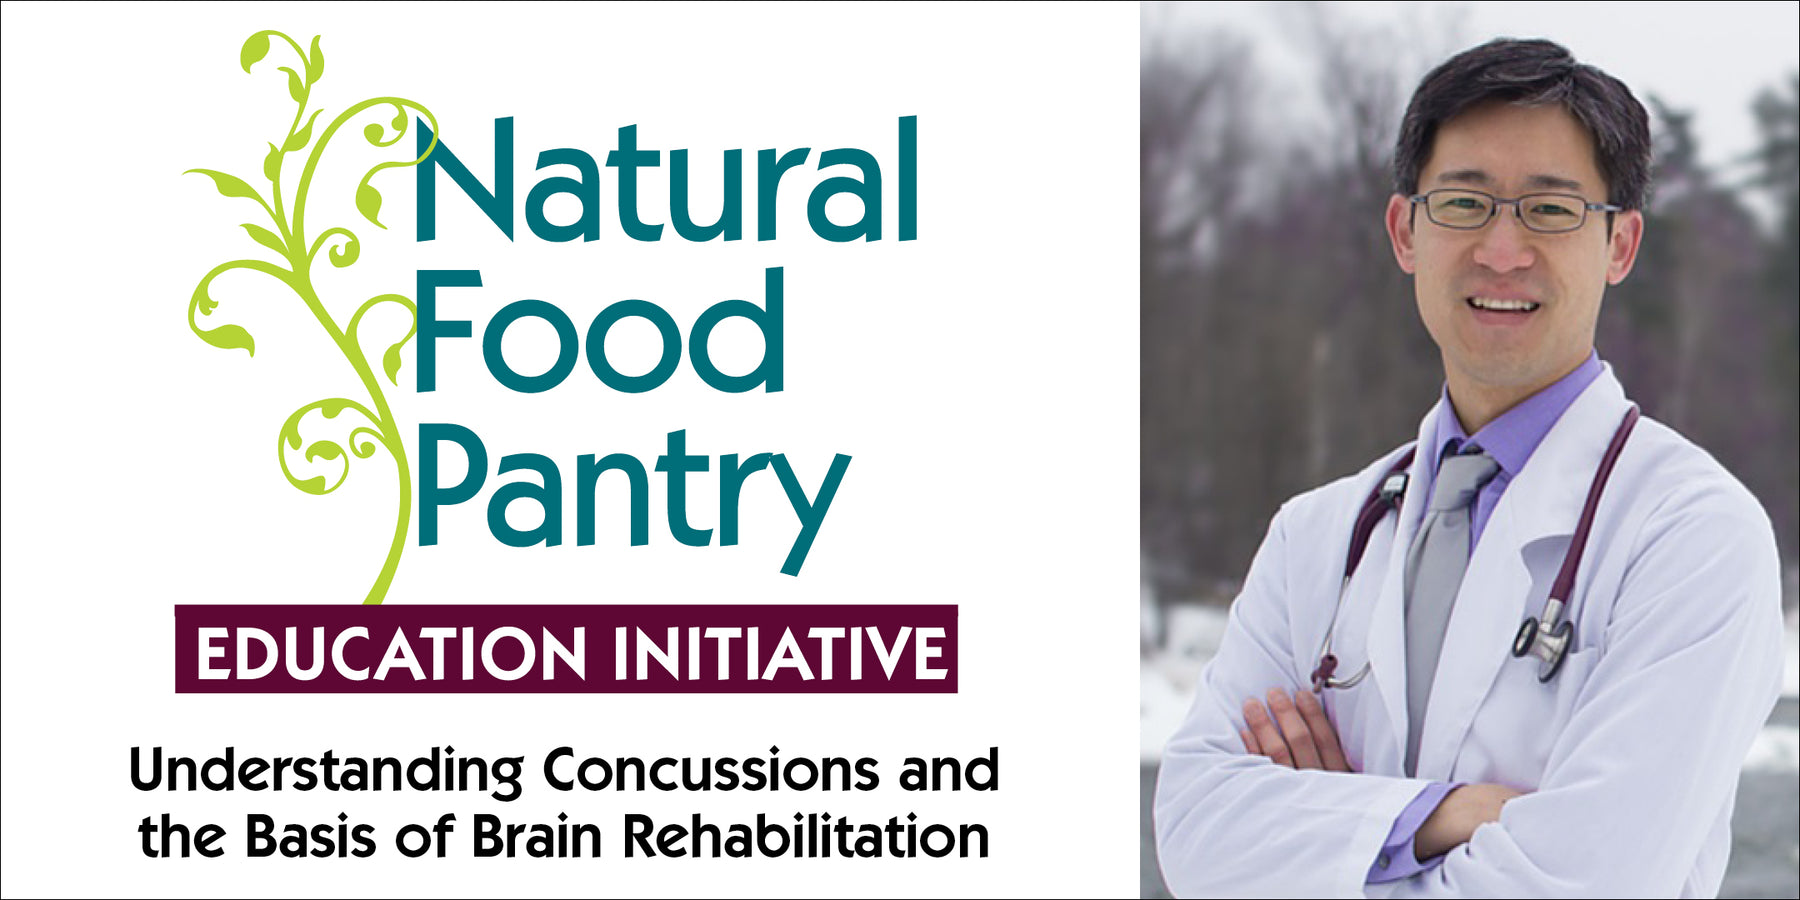 Feb 28: Understanding Concussions and the Basis of Brain Rehabilitation